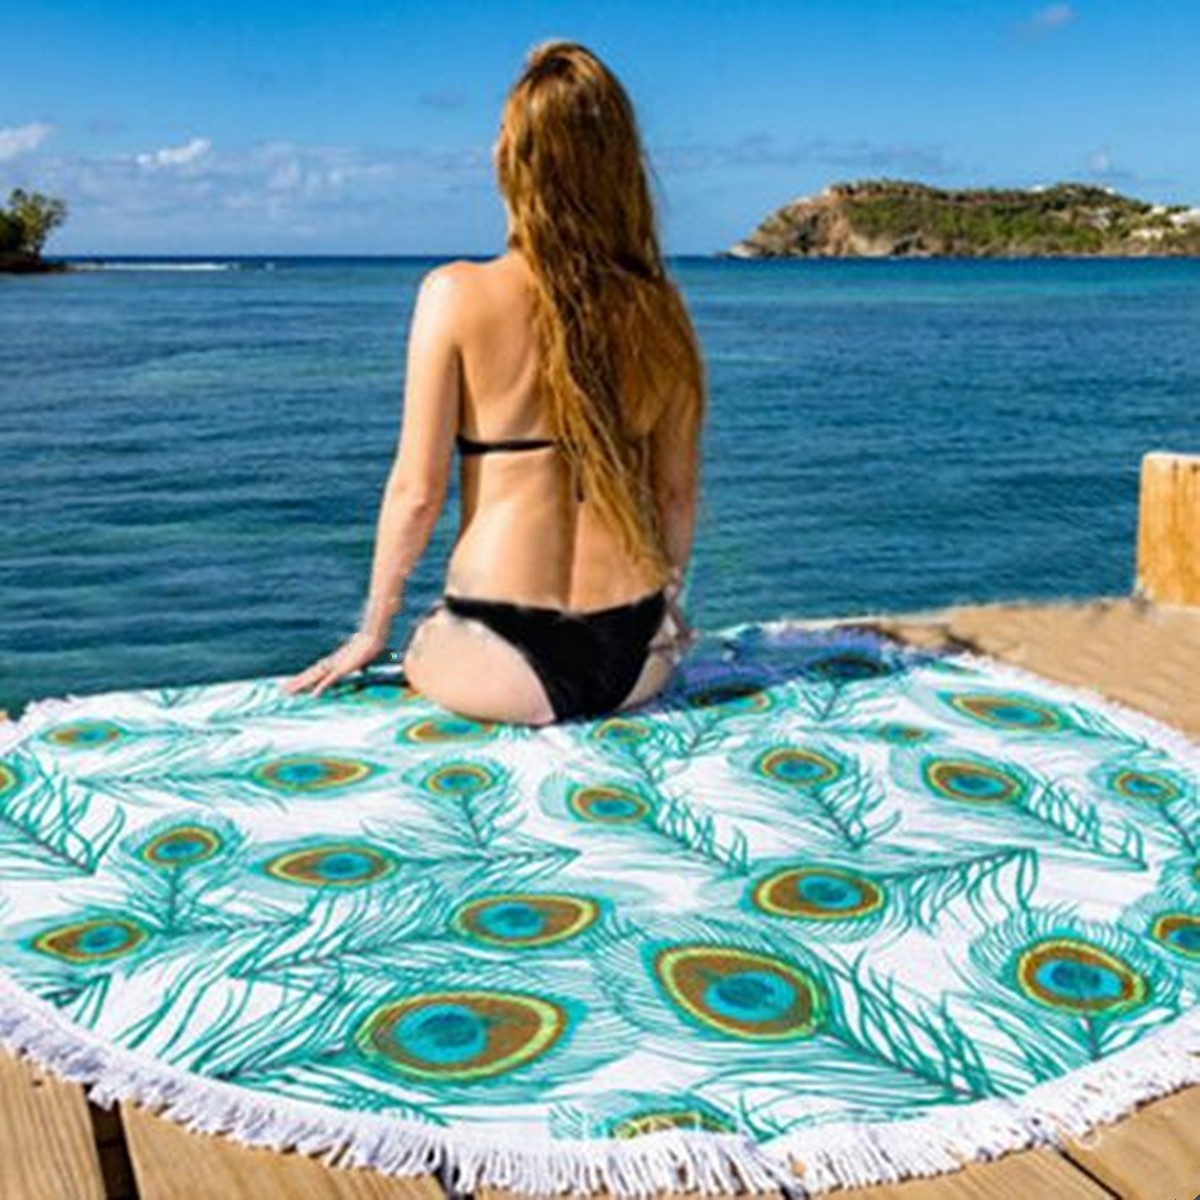 150CM-Peacock-Feather-Printed-Round-Towel-Yoga-Mat-Beach-Printing-Throw-Shawl-Wall-Hanging-Tapestry-1075860